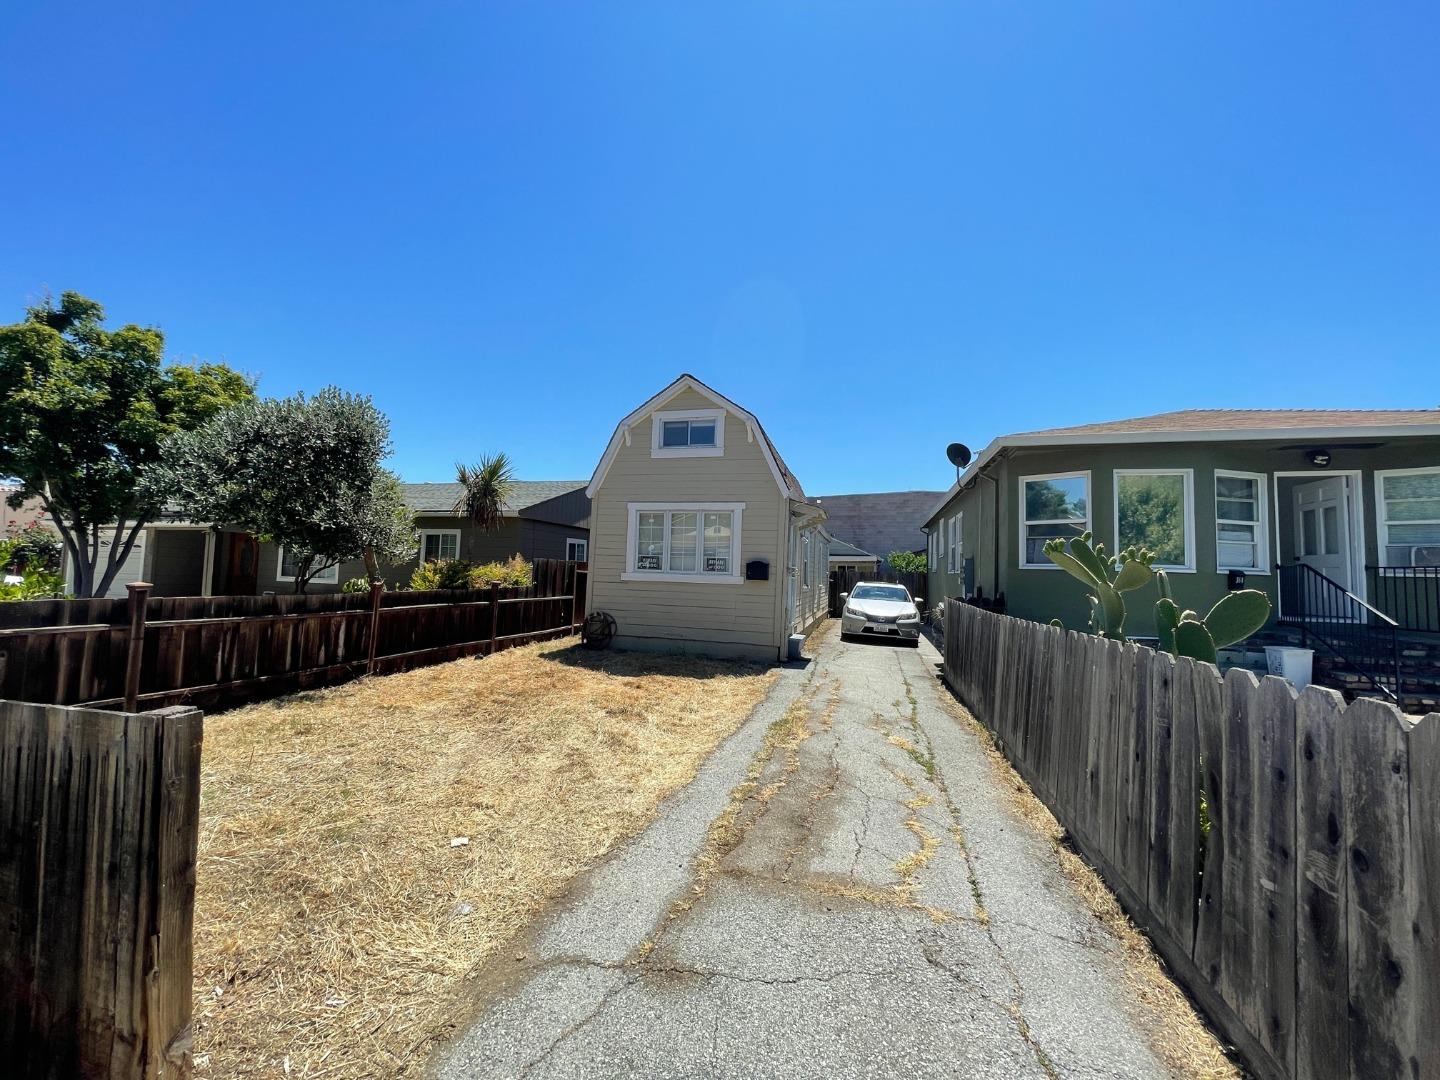 Opportunity for the first-time home buyers, you simply do not want to miss this home. Minutes to FB, downtown MP, Stanford & shopping center.  One bedroom & one bathroom. The detached garage was converted into a living space (2/1). Permit unknown.